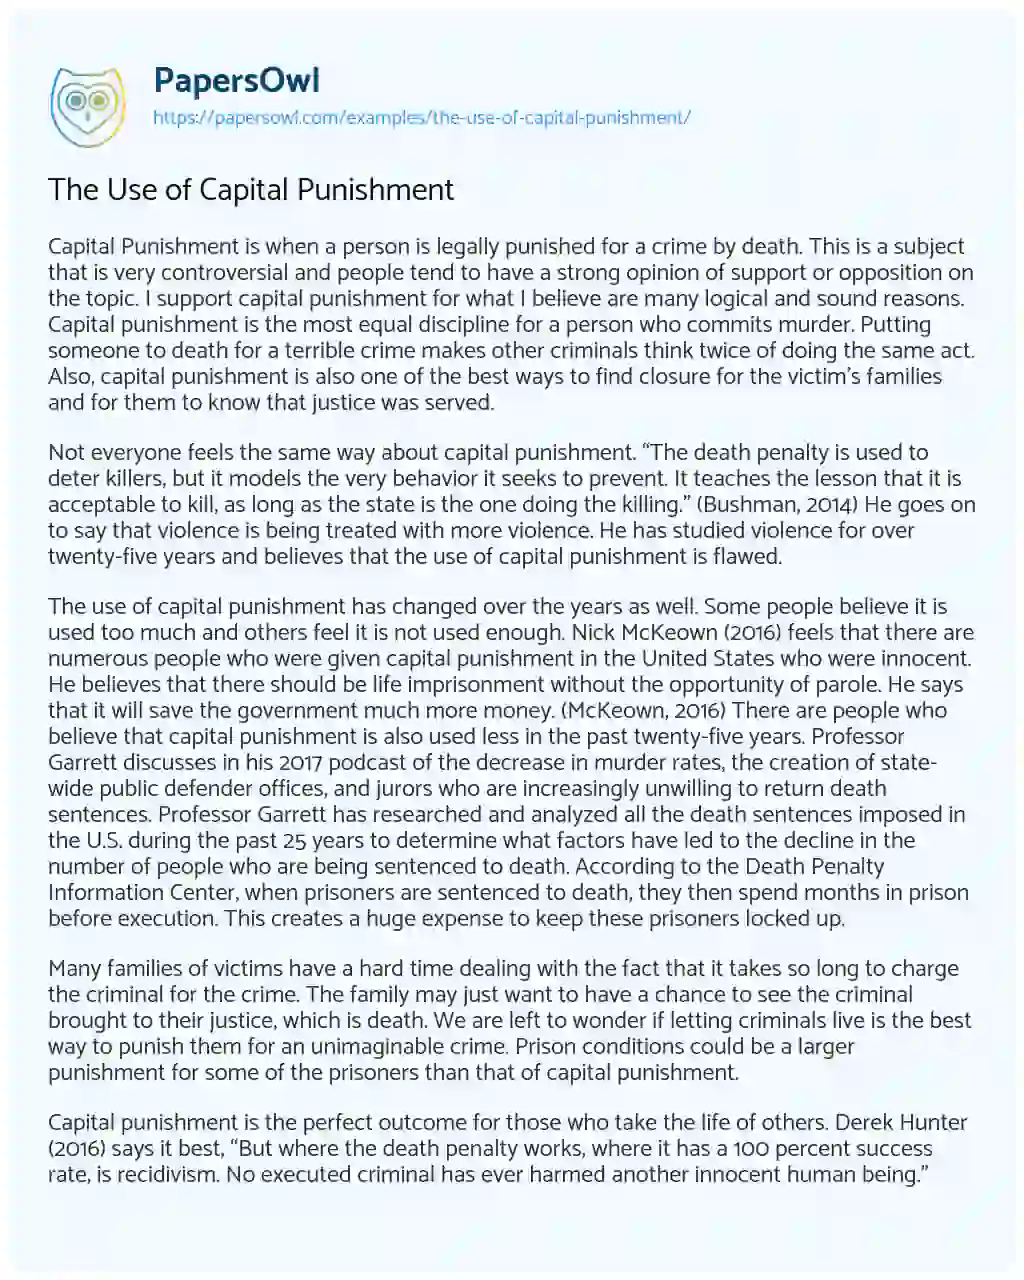 Essay on The Use of Capital Punishment